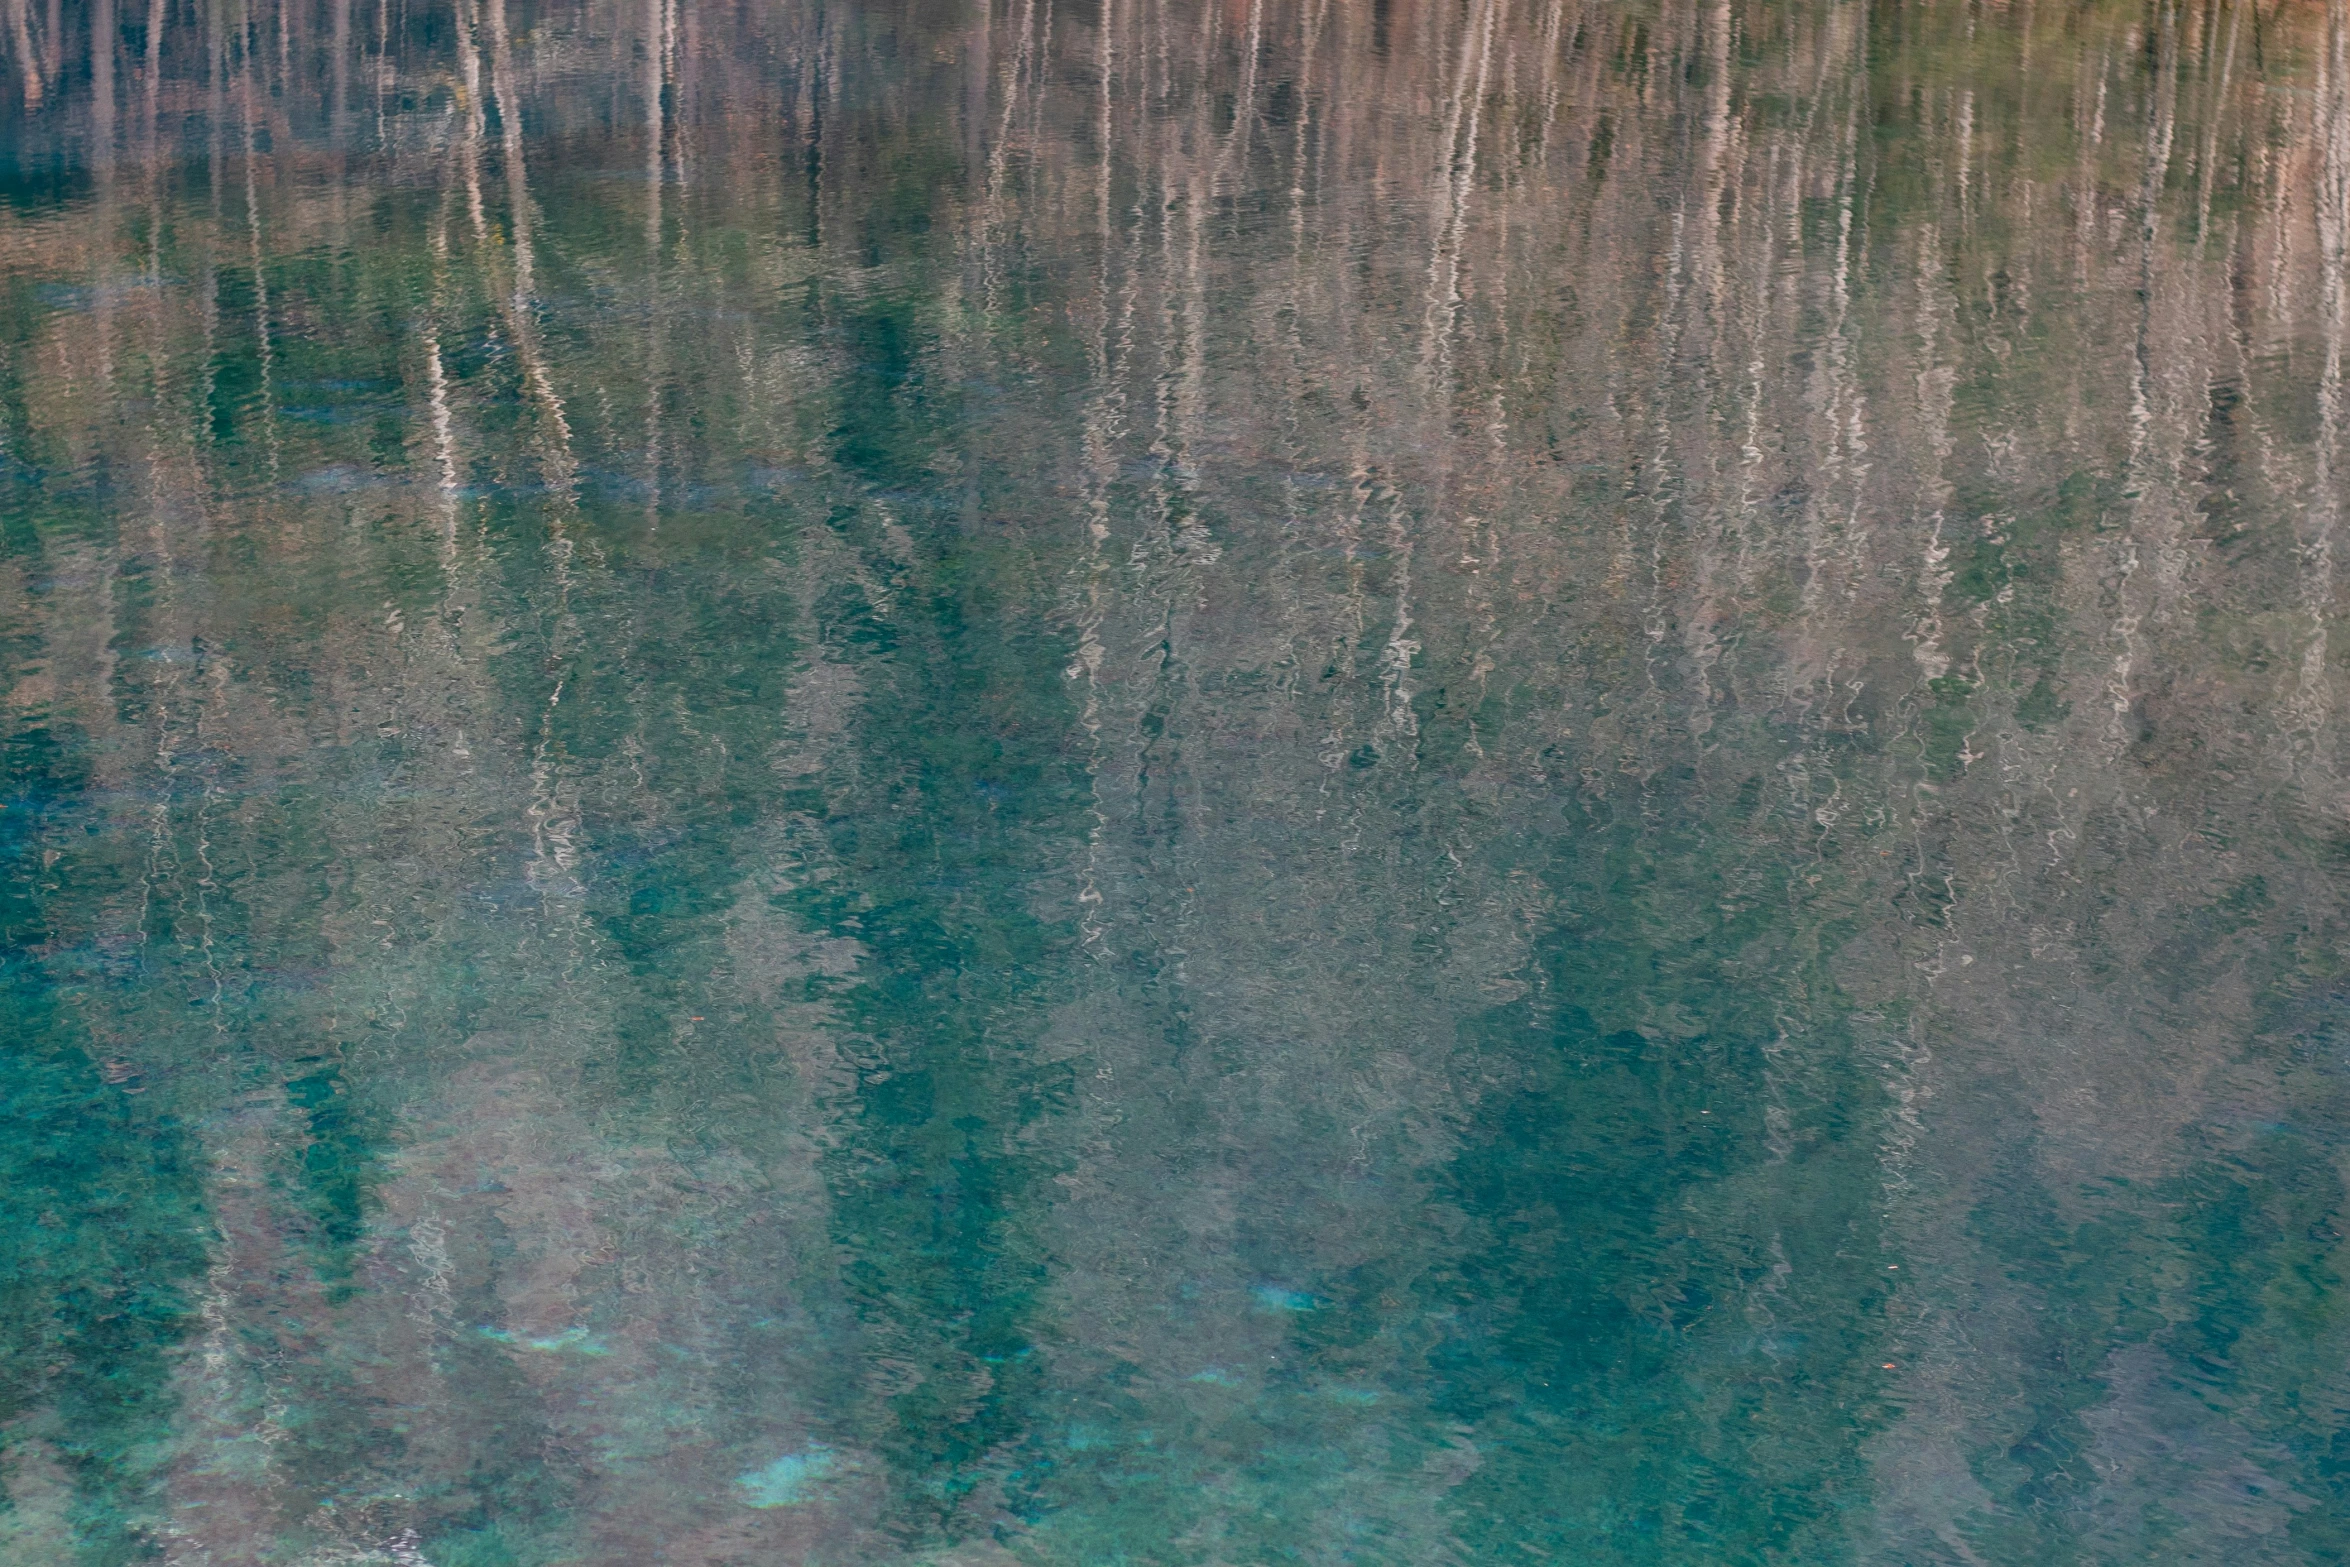 a view of the water, with trees reflecting on it